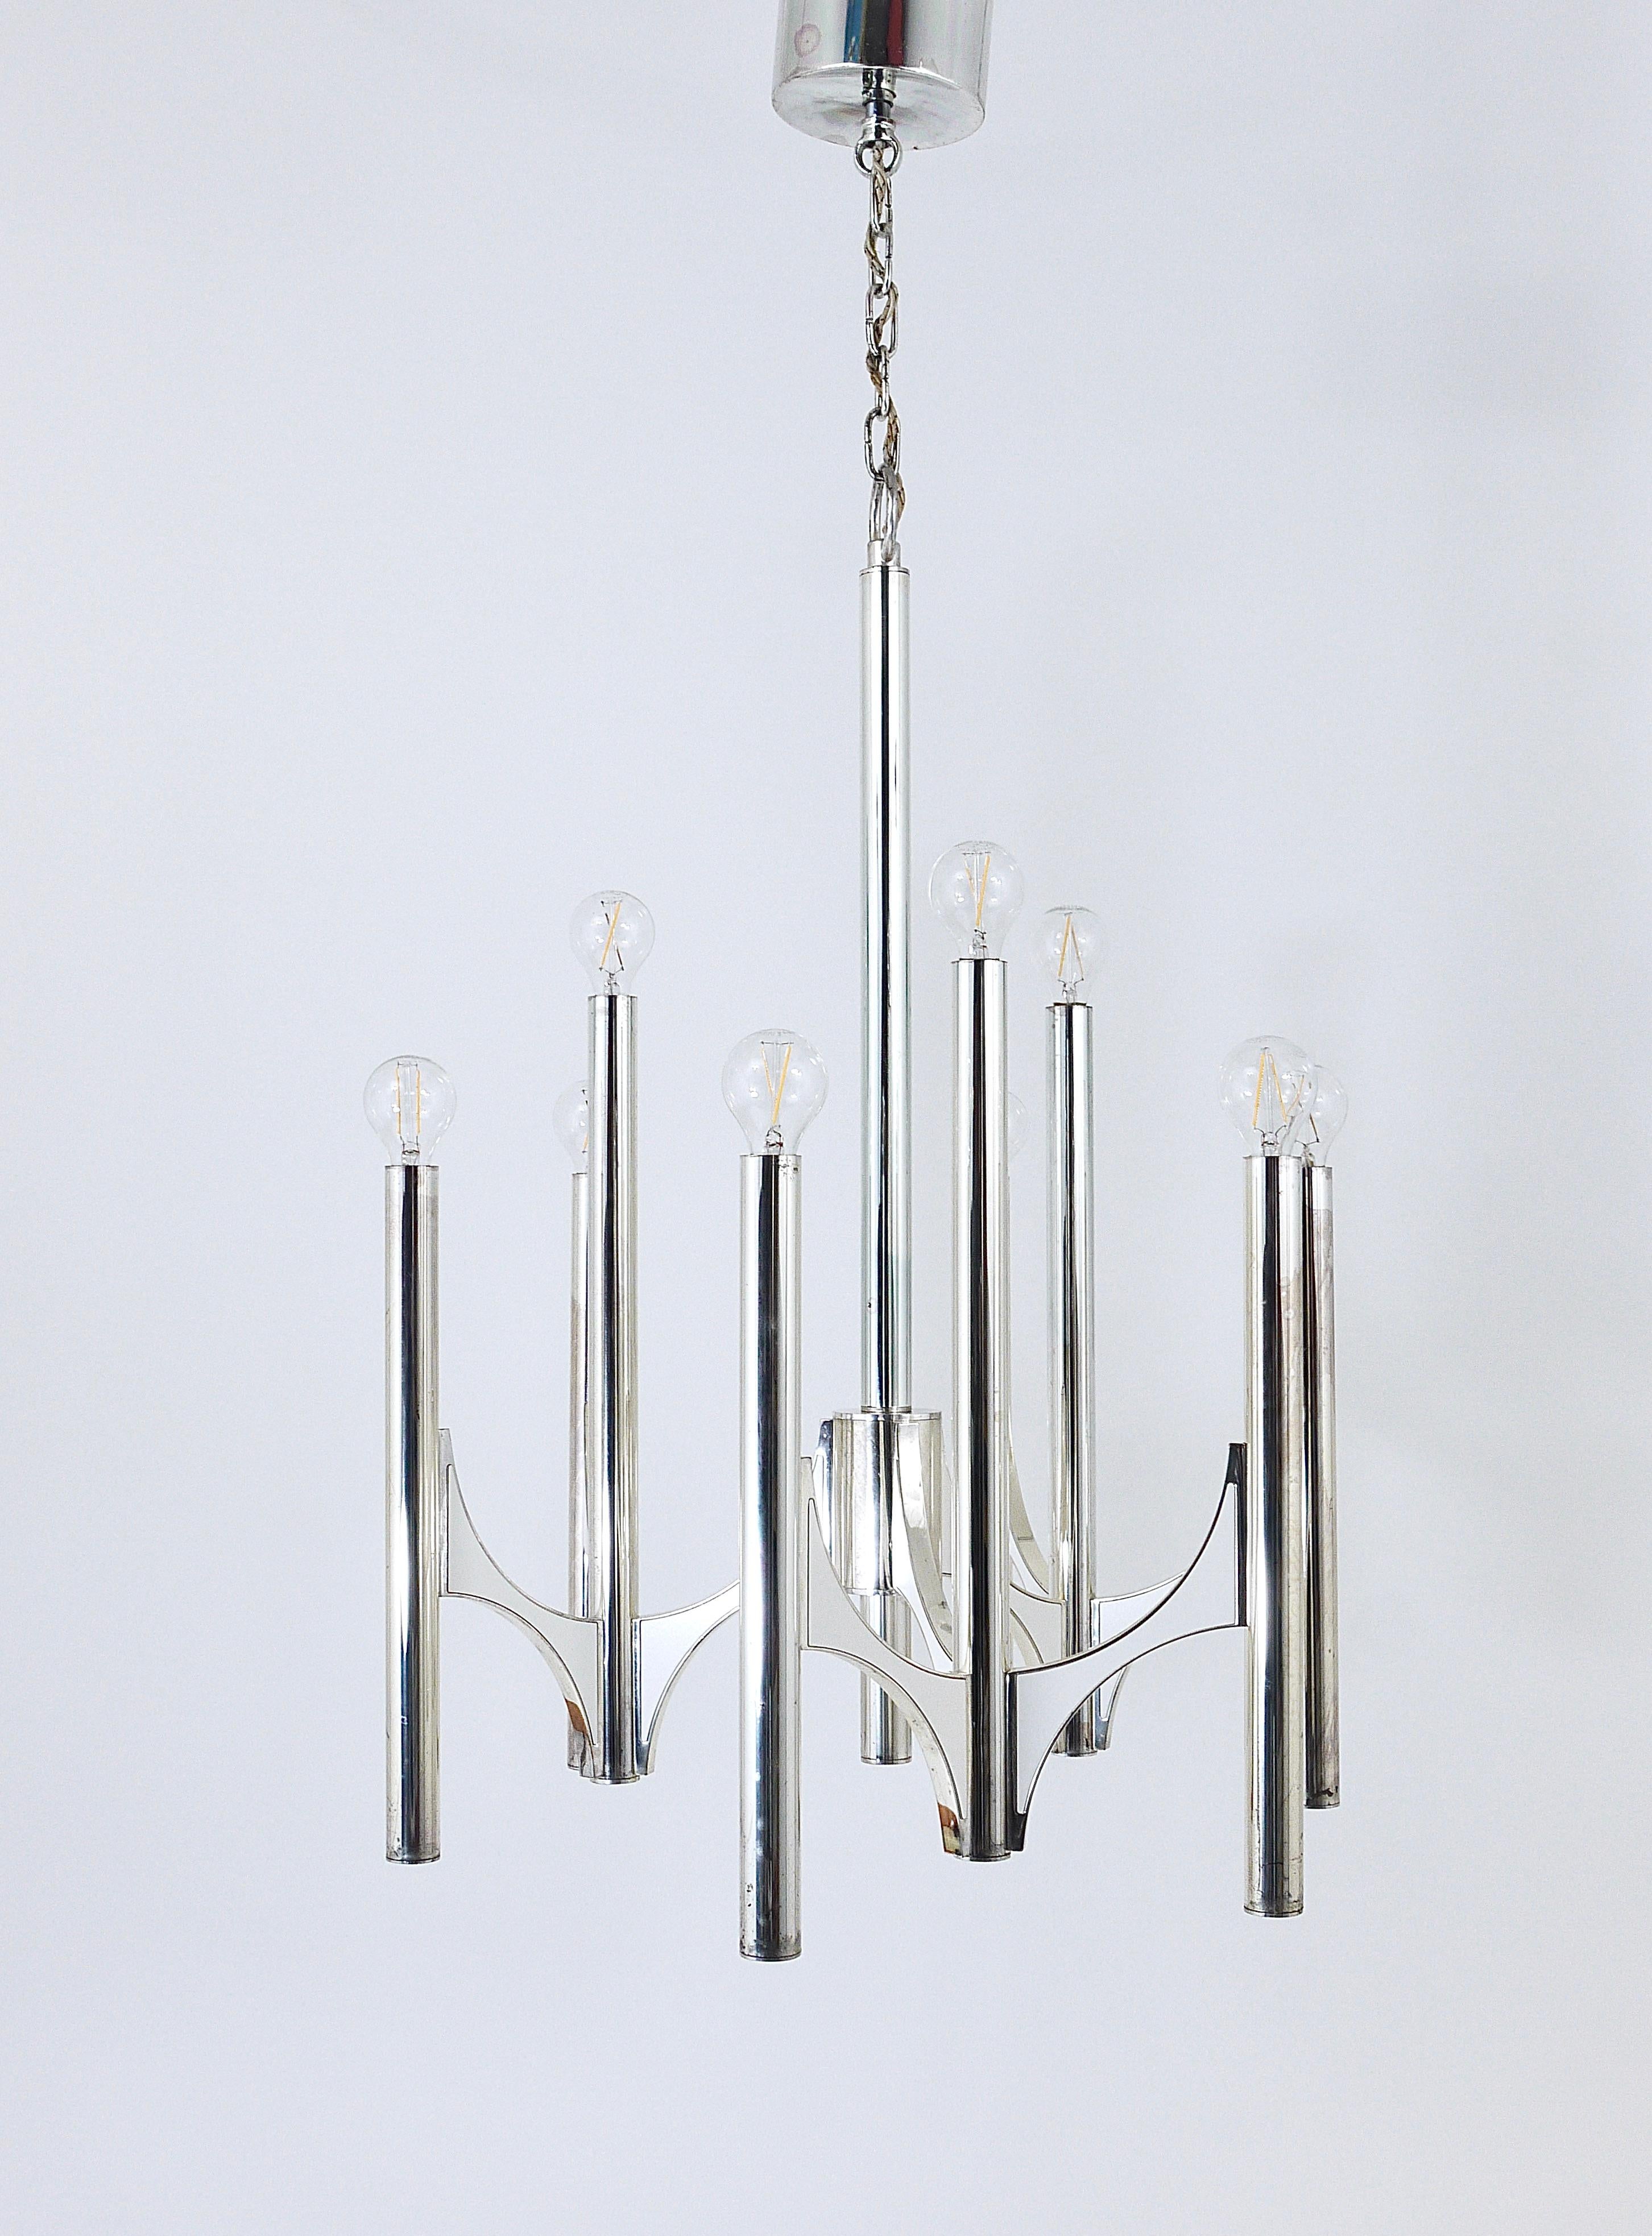 An impressive Modernist chandelier from the 1960s, model Sirius